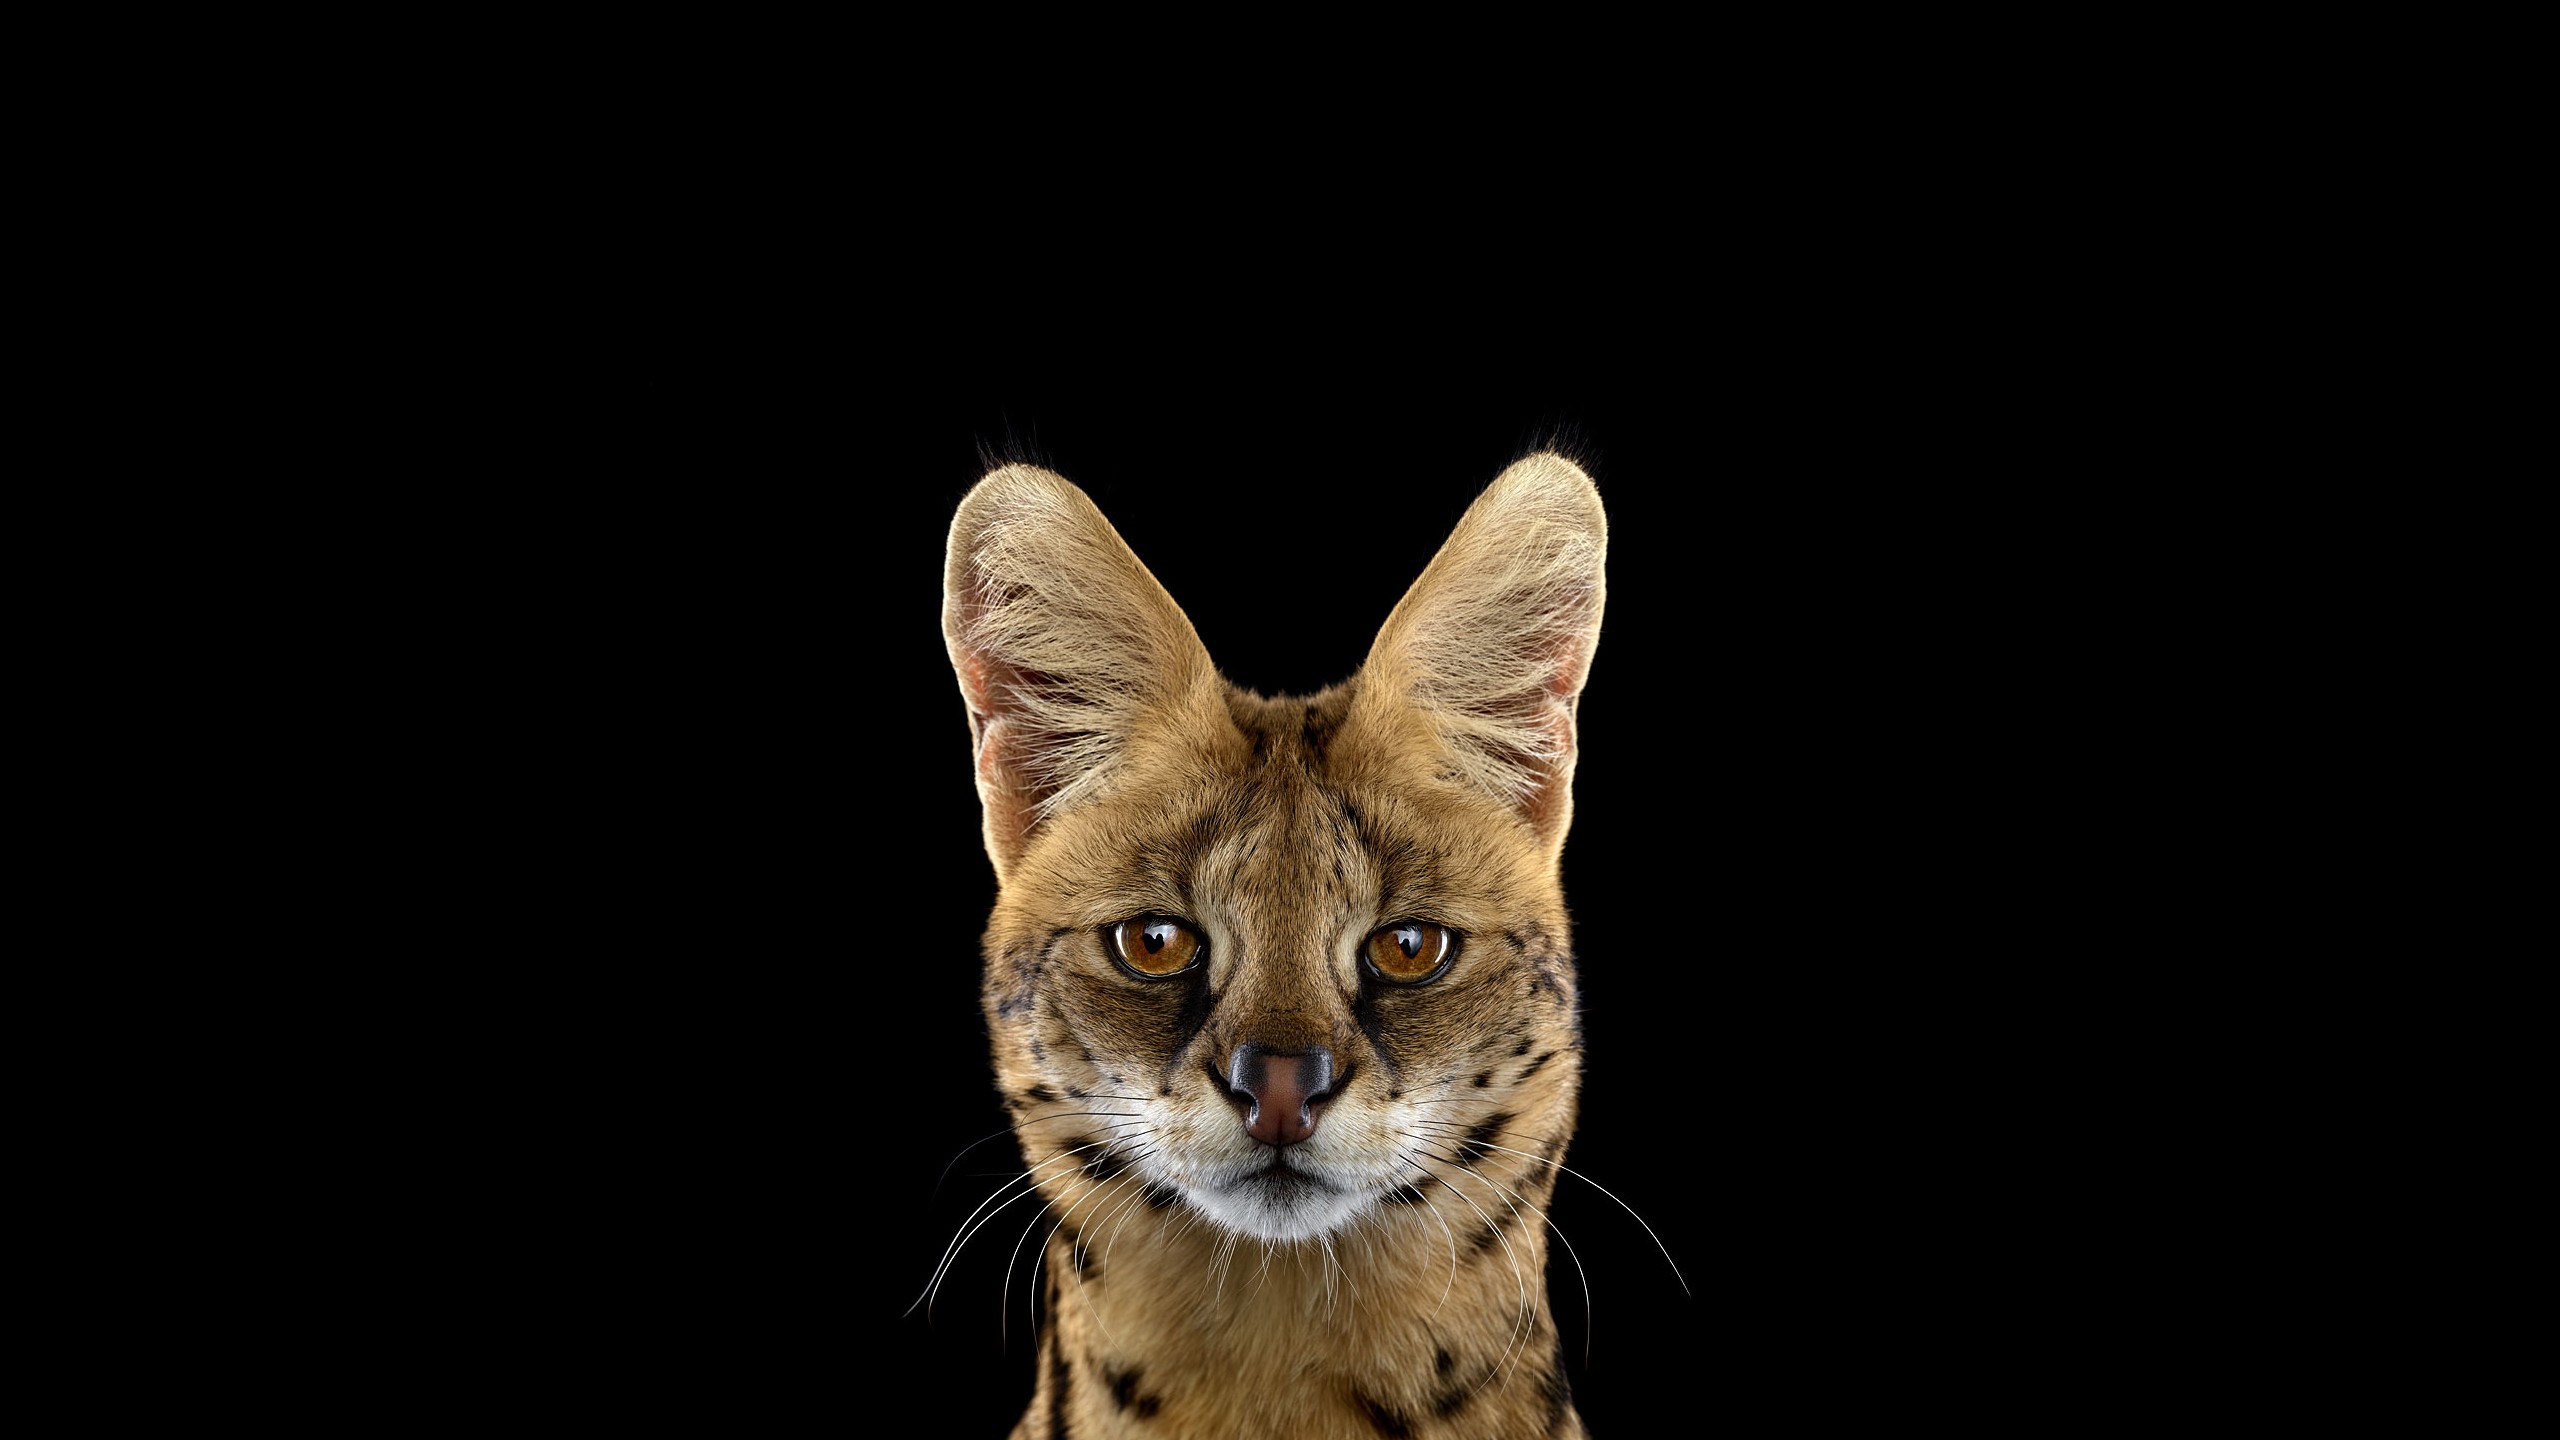 General 2560x1440 serval simple background mammals cats animals